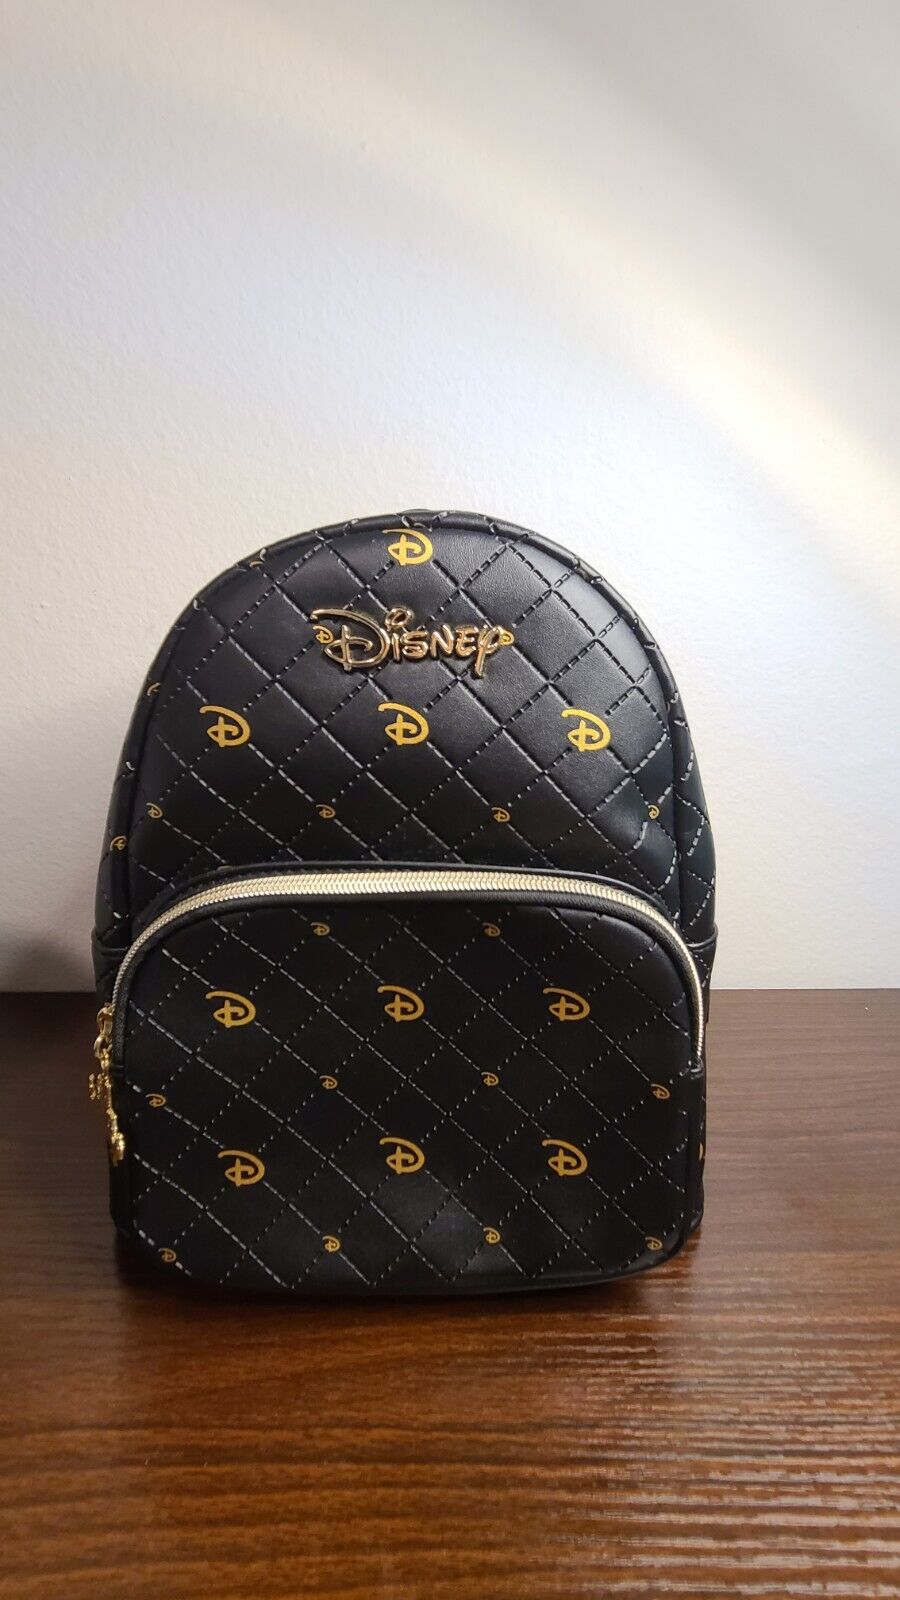 Rare Black & Gold Disney Loungefly Backpack - NWT